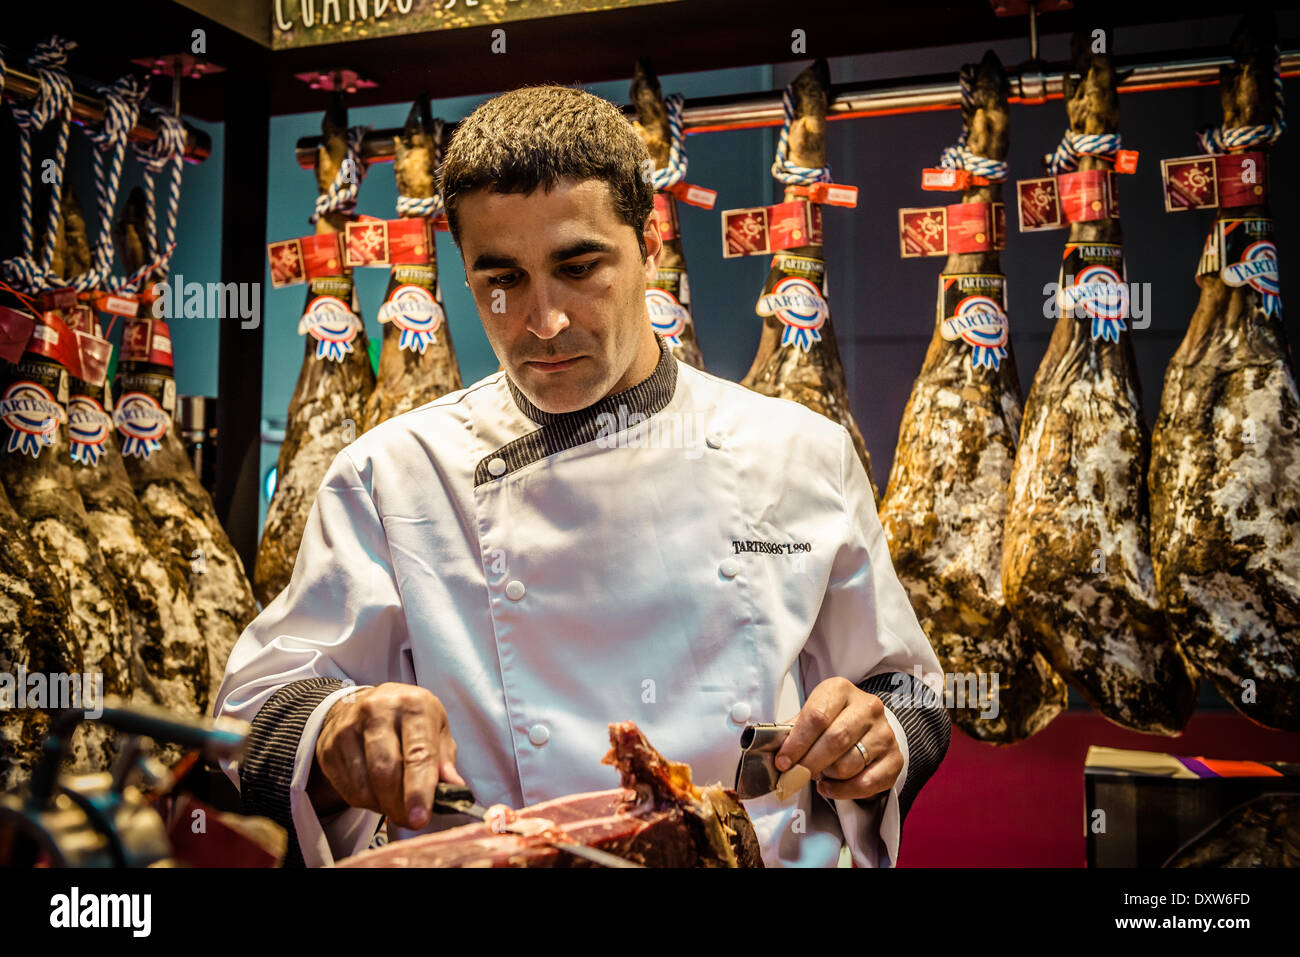 Barcelona, Spain. March 31st, 2014: An master cutter slices "Jamon serrano" at Tartesso's exhibition stand for the visitors of the 20th edition of the Alimentaria in Barcelona Credit:  matthi/Alamy Live News Stock Photo